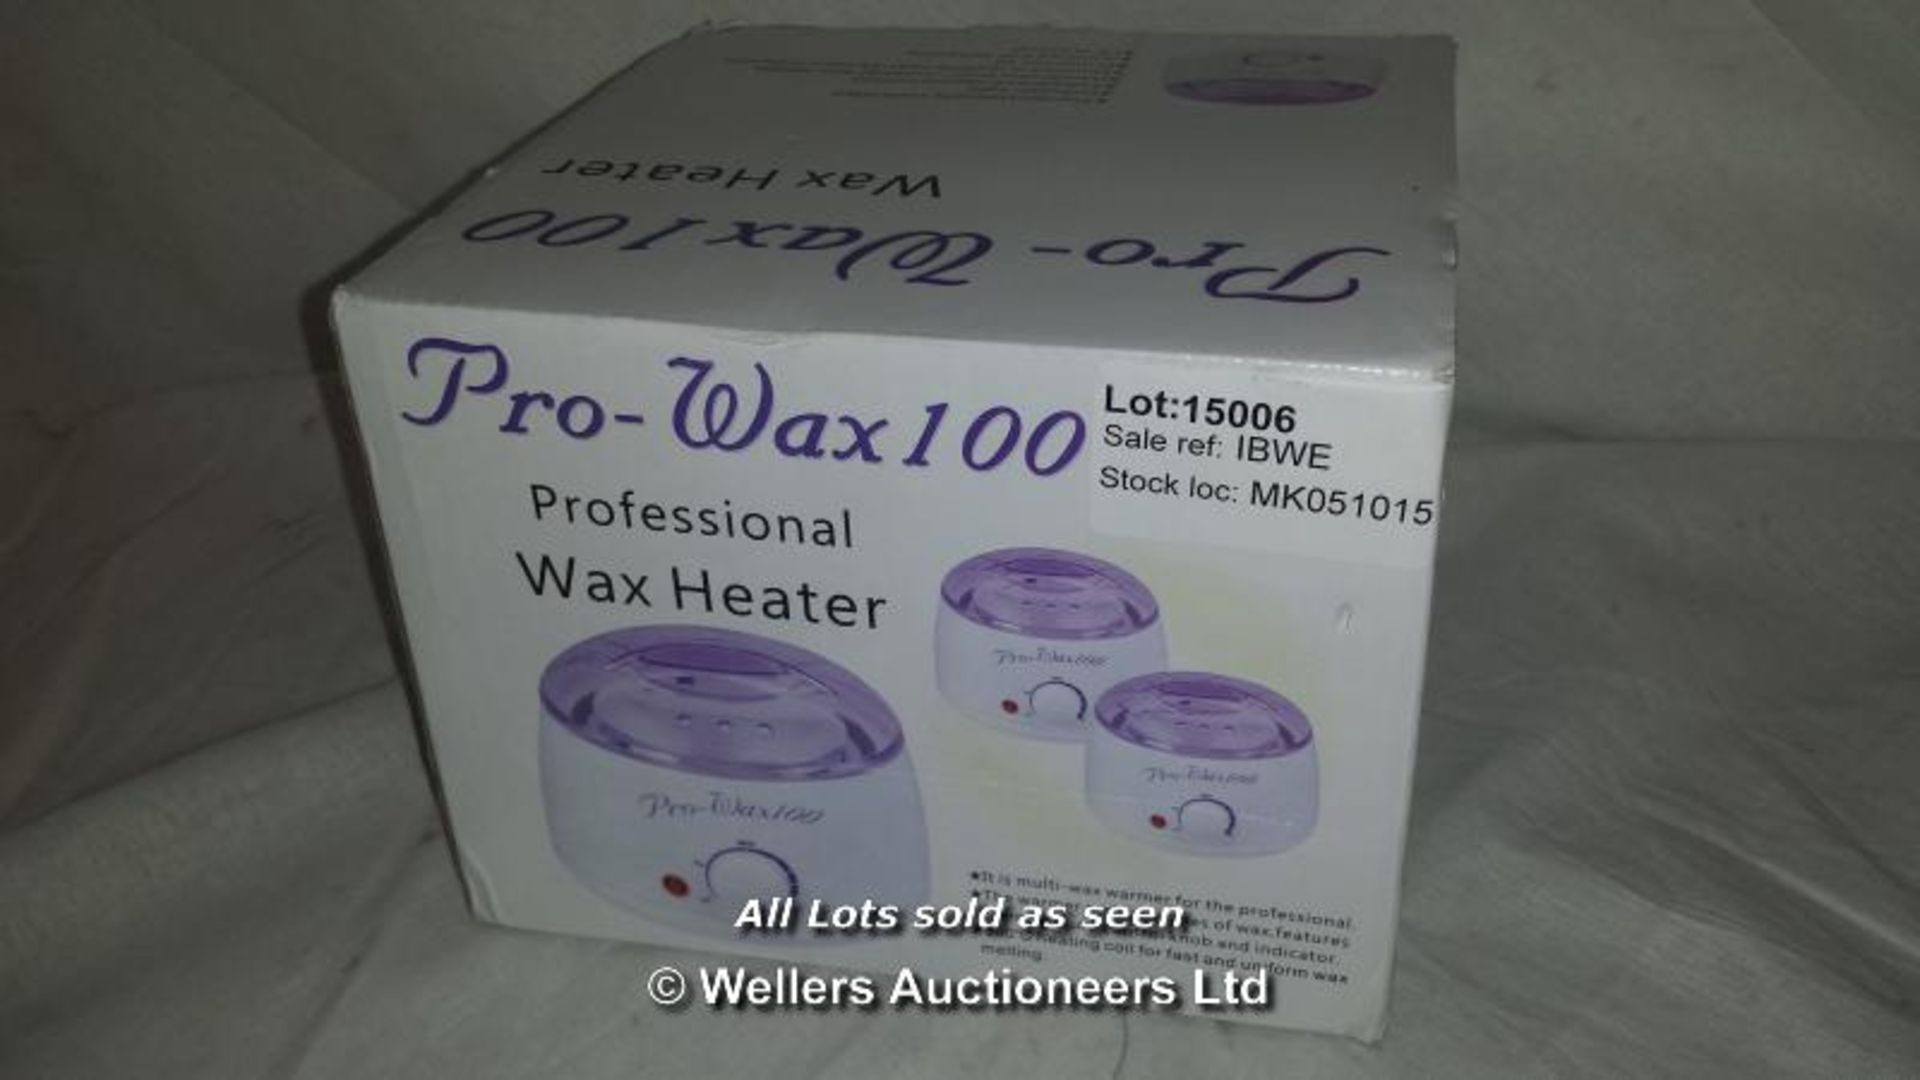 PRO-WAX 100 PROFESSIONAL WAX HEATER (THIS LOT IS FOR DELIVERY ONLY) / GRADE: UNCLAIMED PROPERTY /